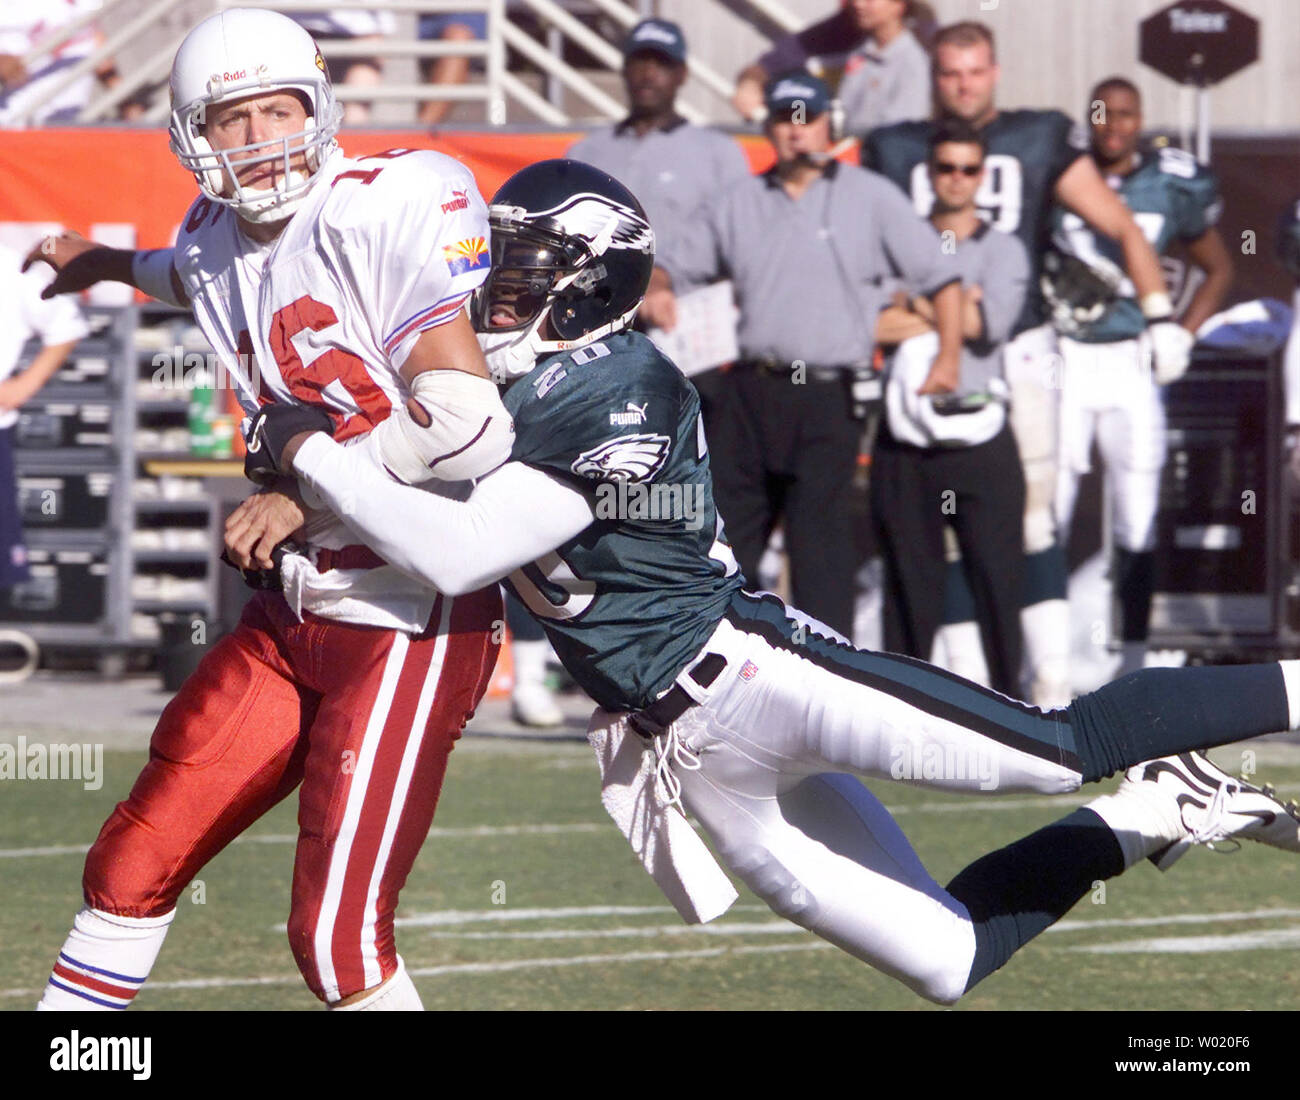 PHO2000101506 - 15 OCTOBER 2000 - TEMPE, ARIZONA, USA: Jake Plummer, Arizona Cardinals' quarterback, is wrapped up Brian Dawkins, Philadelphia Eagles safety in the fouth quarter of the Cardinals-Eagles game at Sun Devil Stadium in Tempe, AZ, Oct. 15. Plummer, who hadn't thrown an interception in the two previous games, threw two against the Eagles Sunday. The Eagles beat the Cardinals 33-14. The loss dropped the Cardinals to 2 - 4. The Eagles improved to 4 - 3.     cc/jk/Jack Kurtz      UPI Stock Photo